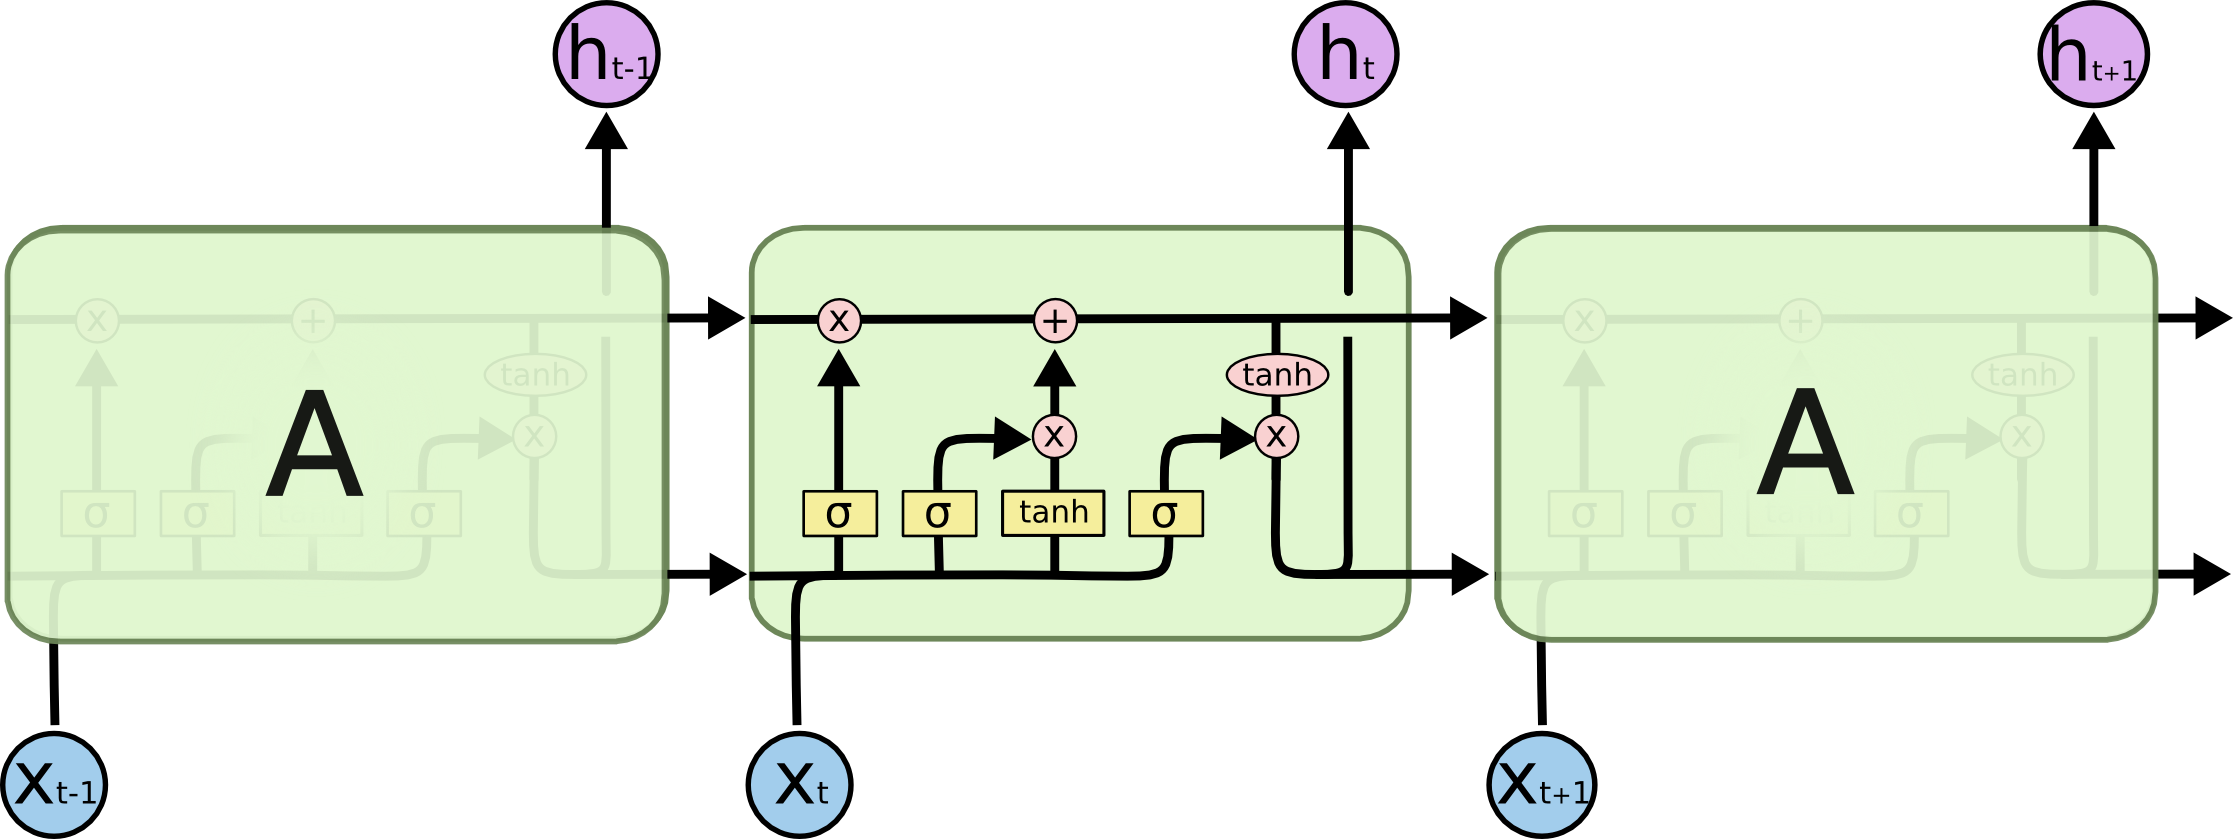 File:LSTM3-chain.png